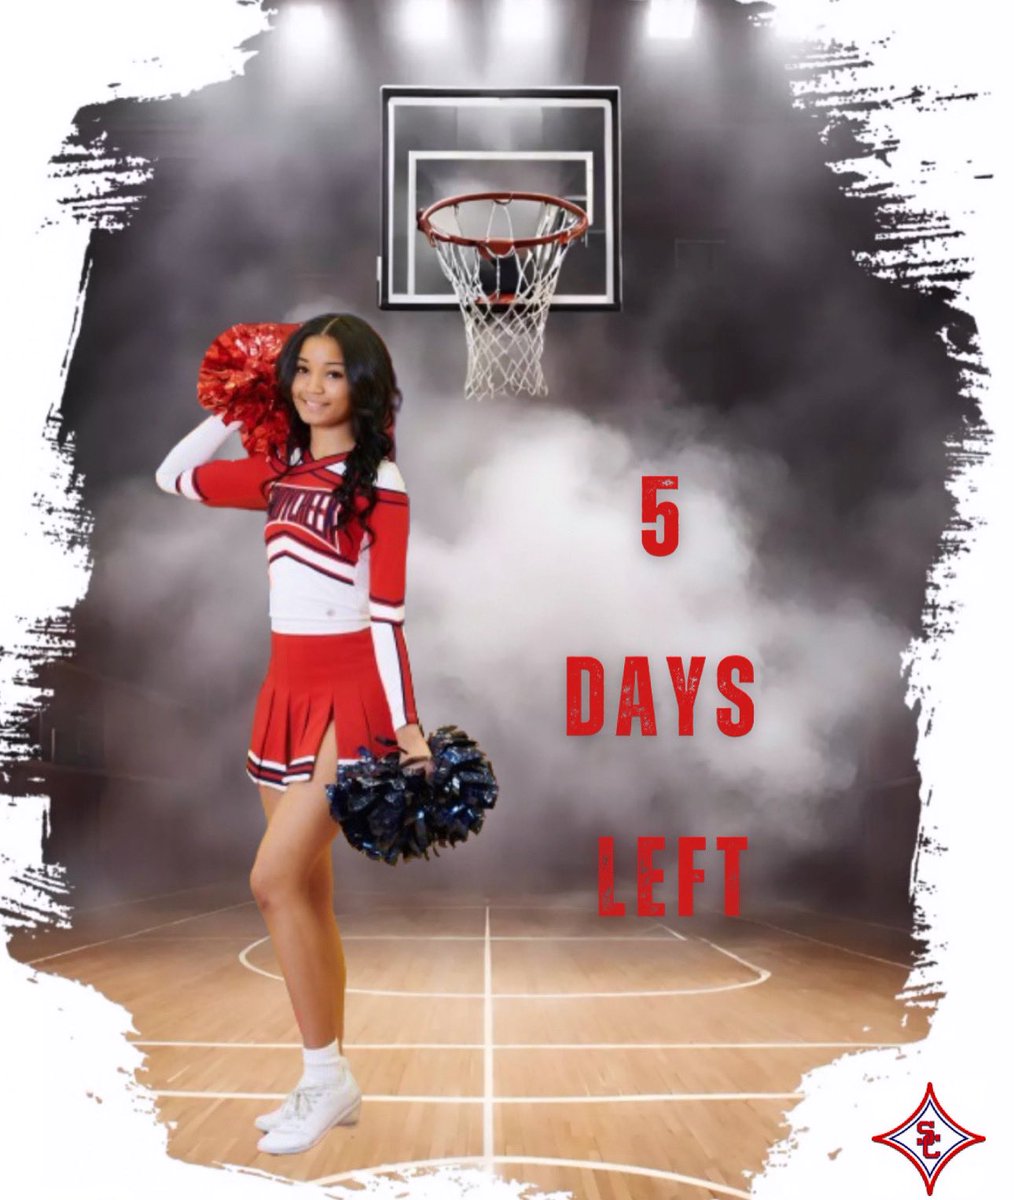 5️⃣ days left until Senior Night, Friday, 2/9/2024! Counting down the days until the spotlight shines on our Cheer 📣 and Basketball 🏀 Seniors! #blackgirlscheer #dance #creeklife #competitiveadvantage #sandycreek #gocreek #schscheer #basketballcheer #basketball #sandycreekcheer